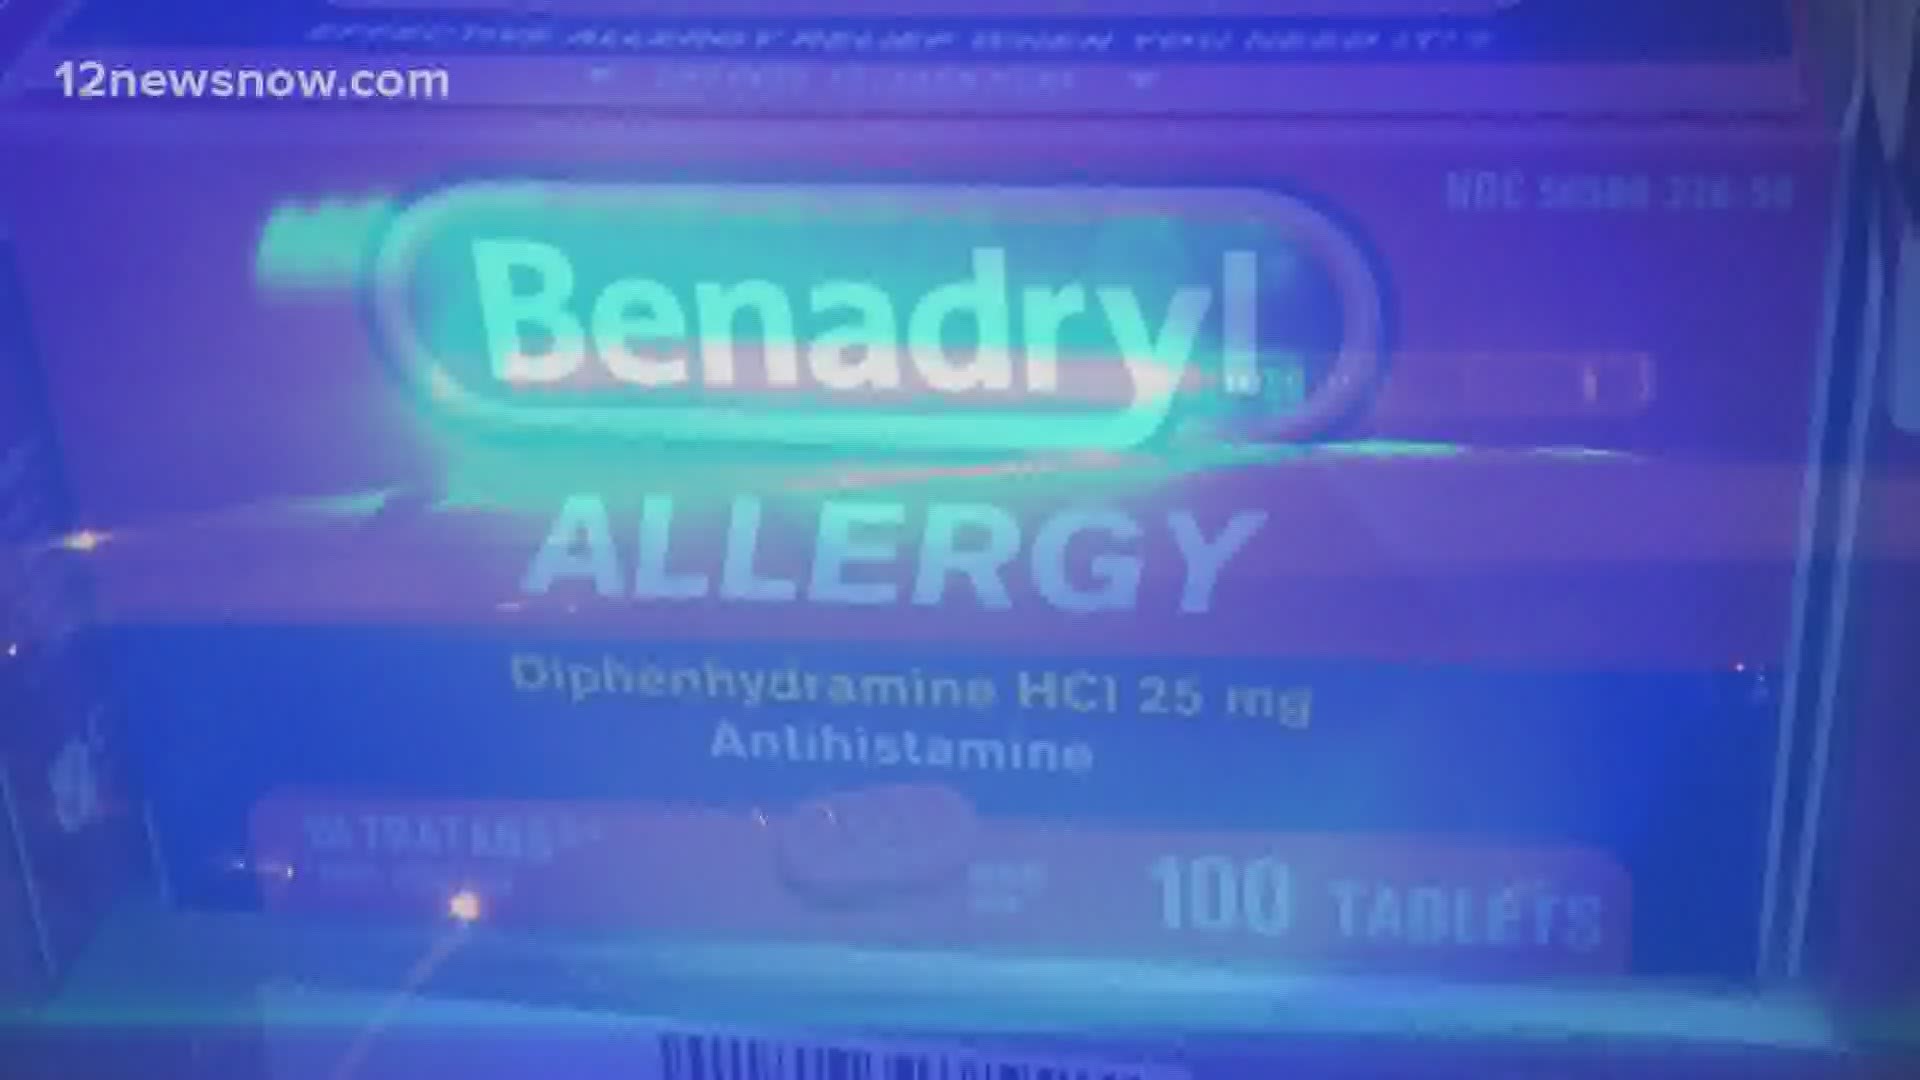 One expert says large doses of Benadryl can cause seizures and heart problems.